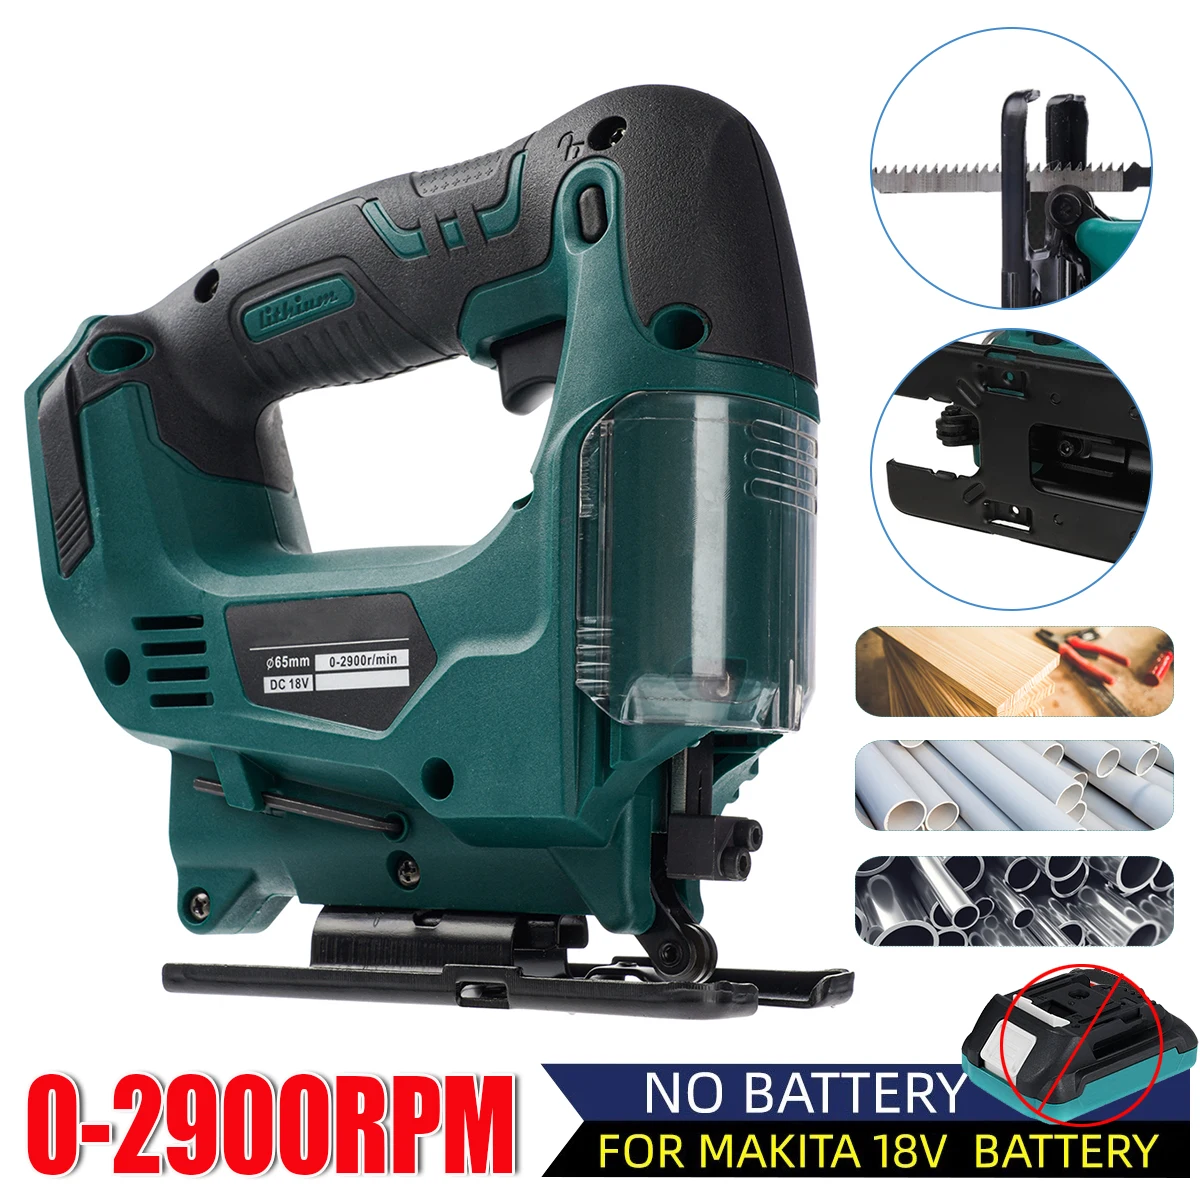 21V 65mm 2900RPM Cordless Jigsaw Electric Jig Saw Portable Multi-Function Woodworking Power Tool for Makita 18V Battery 65mm 2900rpm 18v brushless jigsaw electric jig saw blade adjustable woodworking led power tool for makita 18v battery